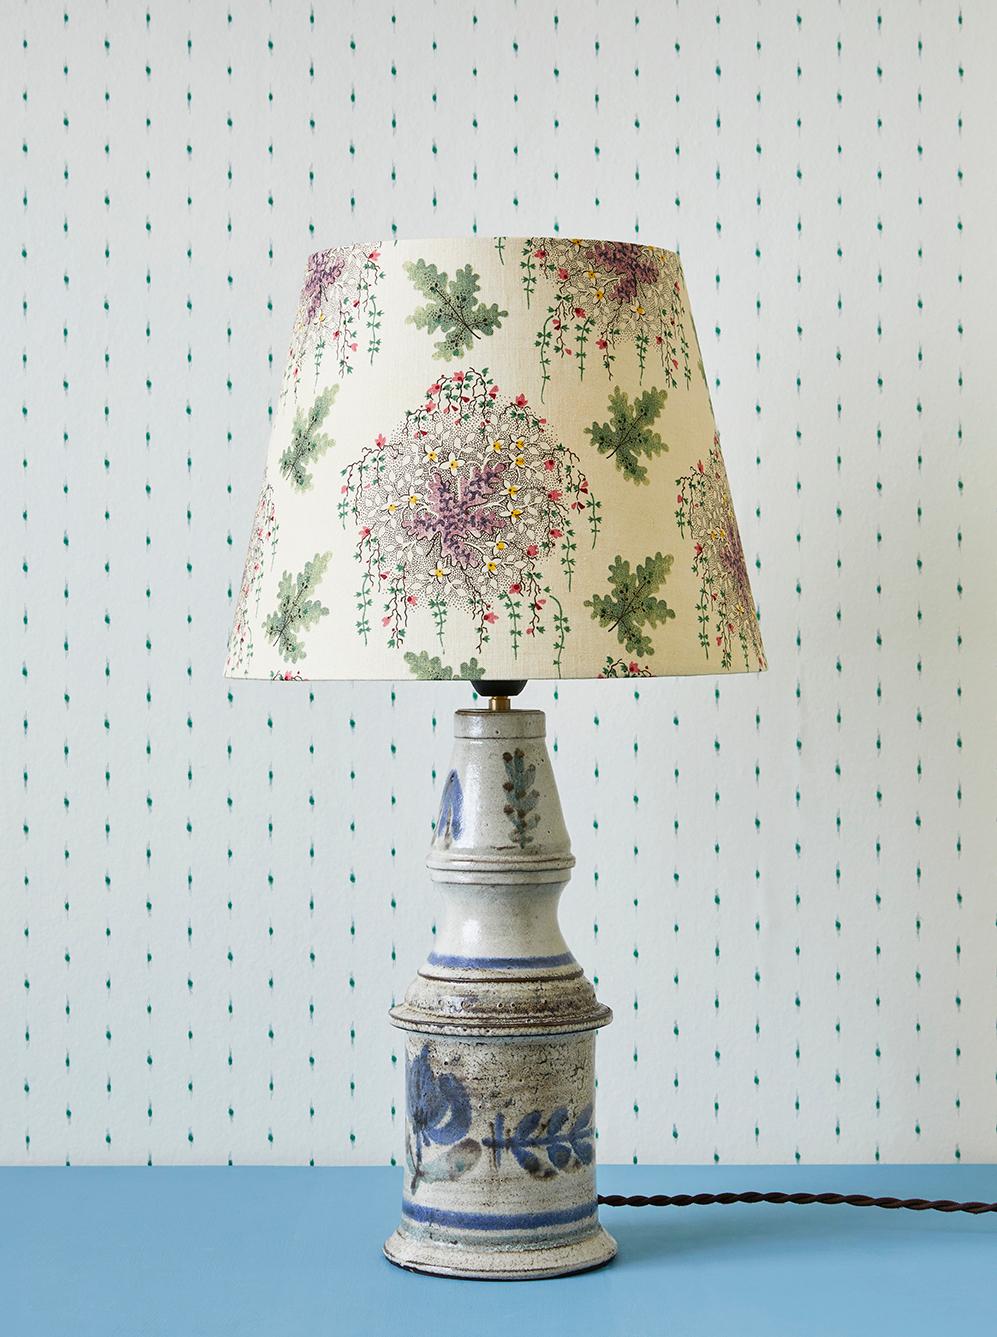 Gustave Reynaud
France, 1950's

Ceramic table lamp with customized shade by The Apartment.

H 55 x Ø 30 cm